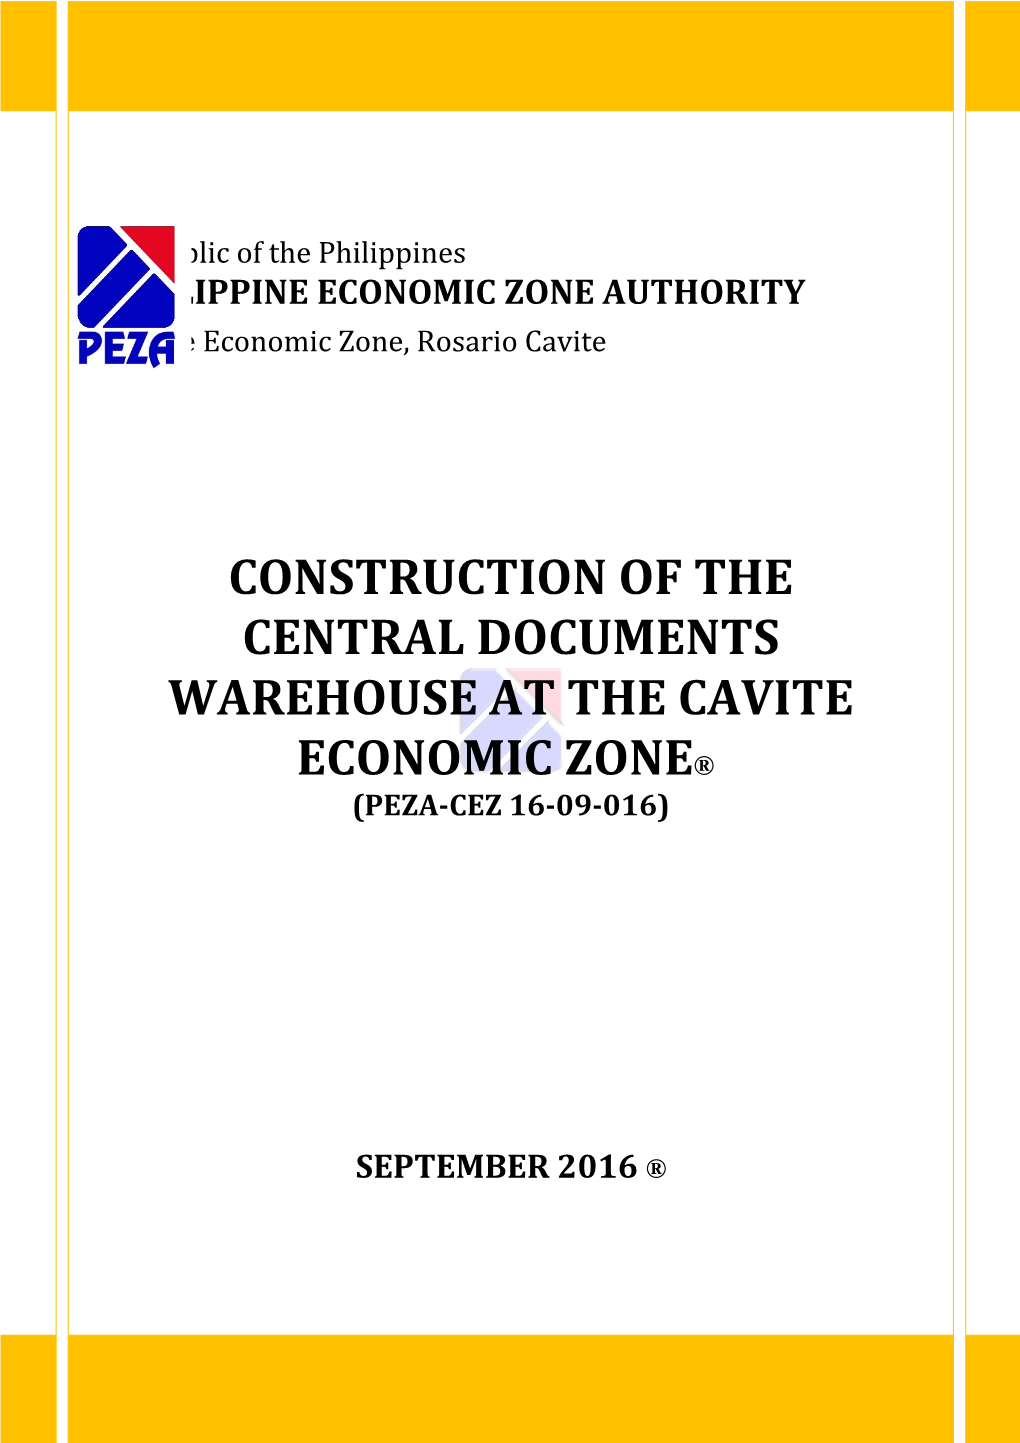 Construction of the Central Documents Warehouse at the Cavite Economic Zone